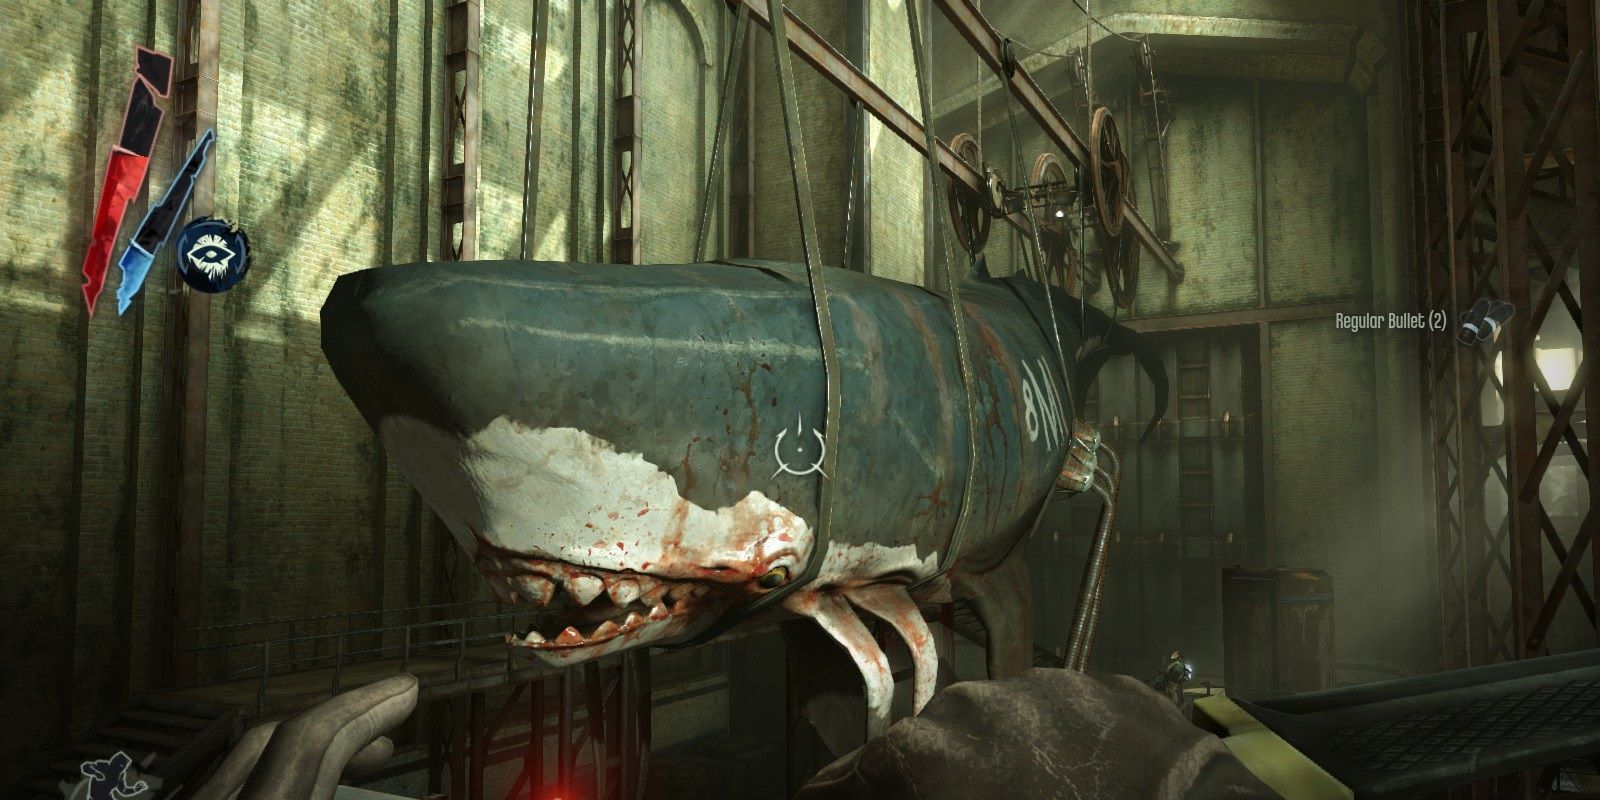 Dishonored DLC, Daud comes across a live whale